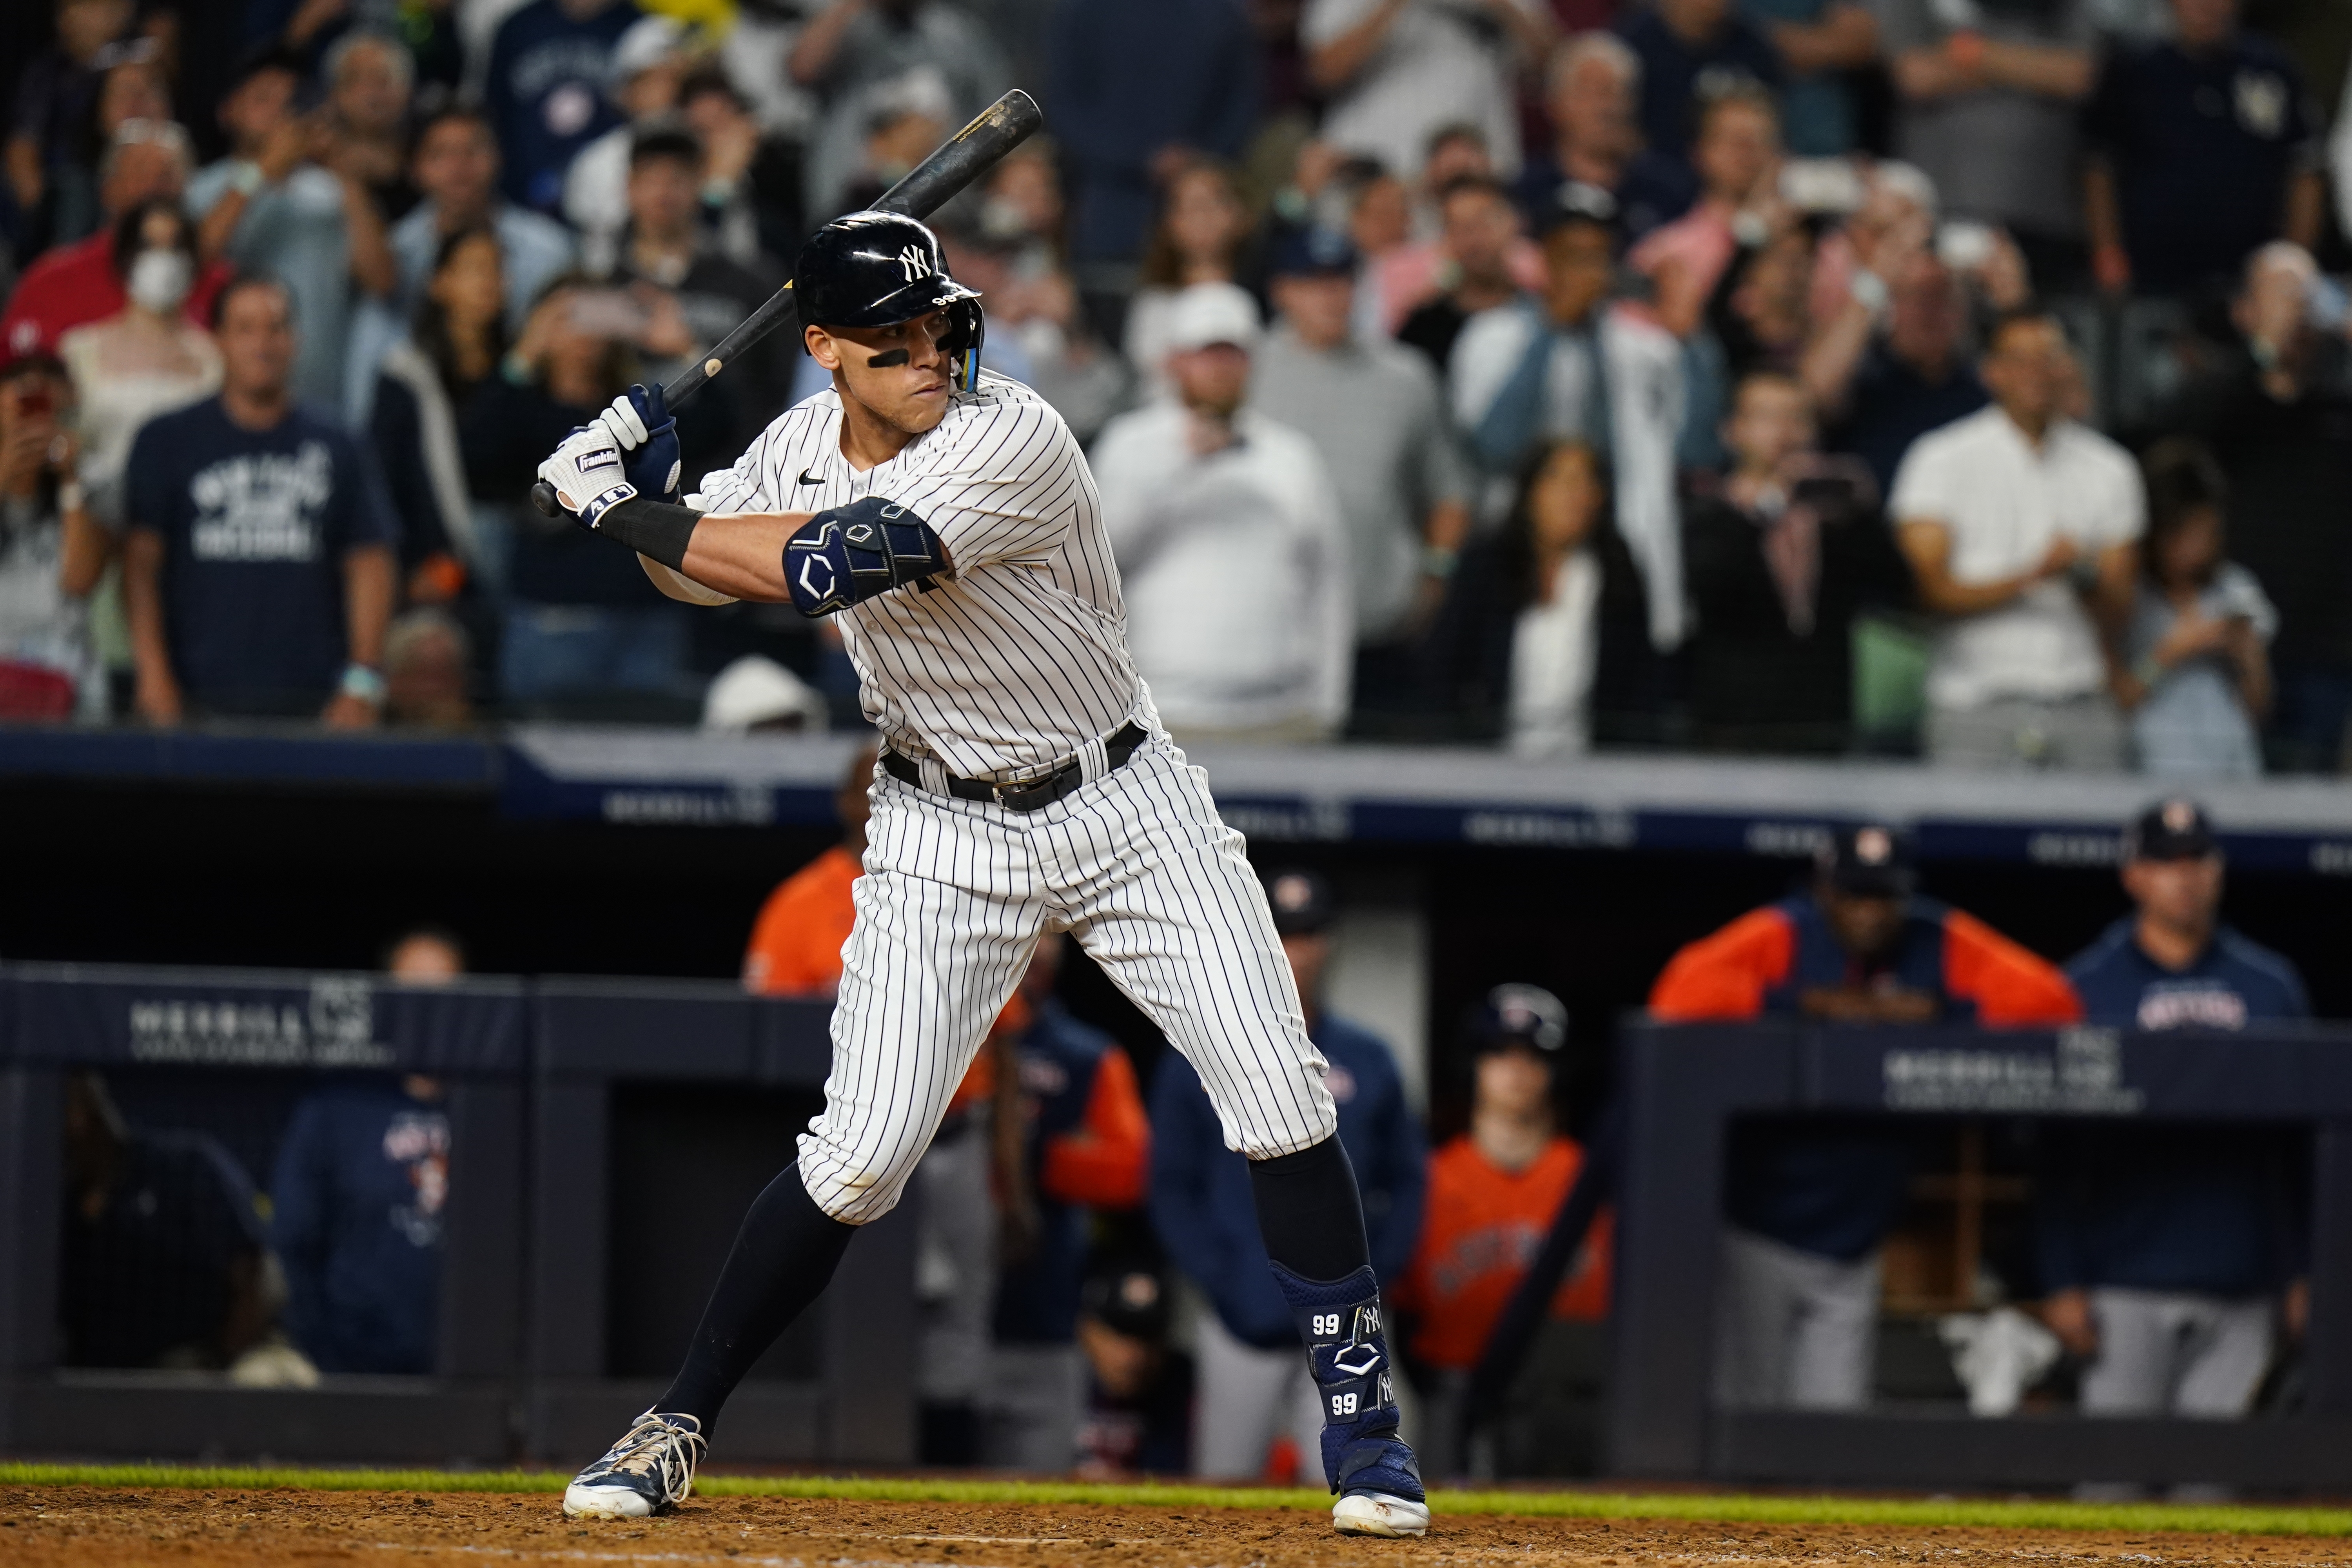 Yankees vs. Astros live stream: How to watch Wednesday's game